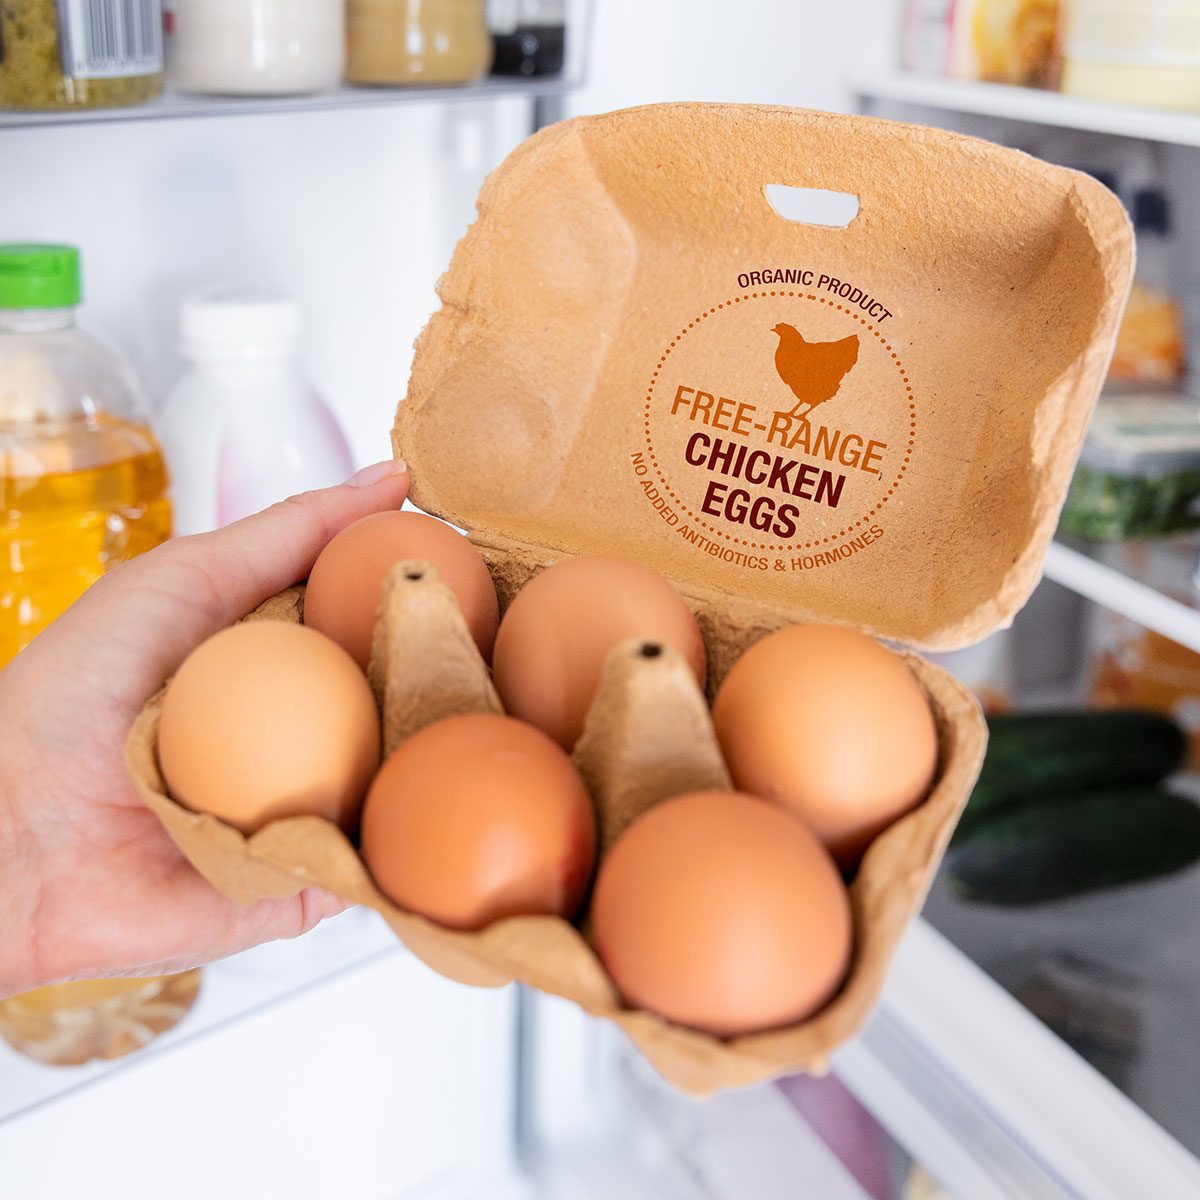 Holding carton of eggs in front of a open fridge